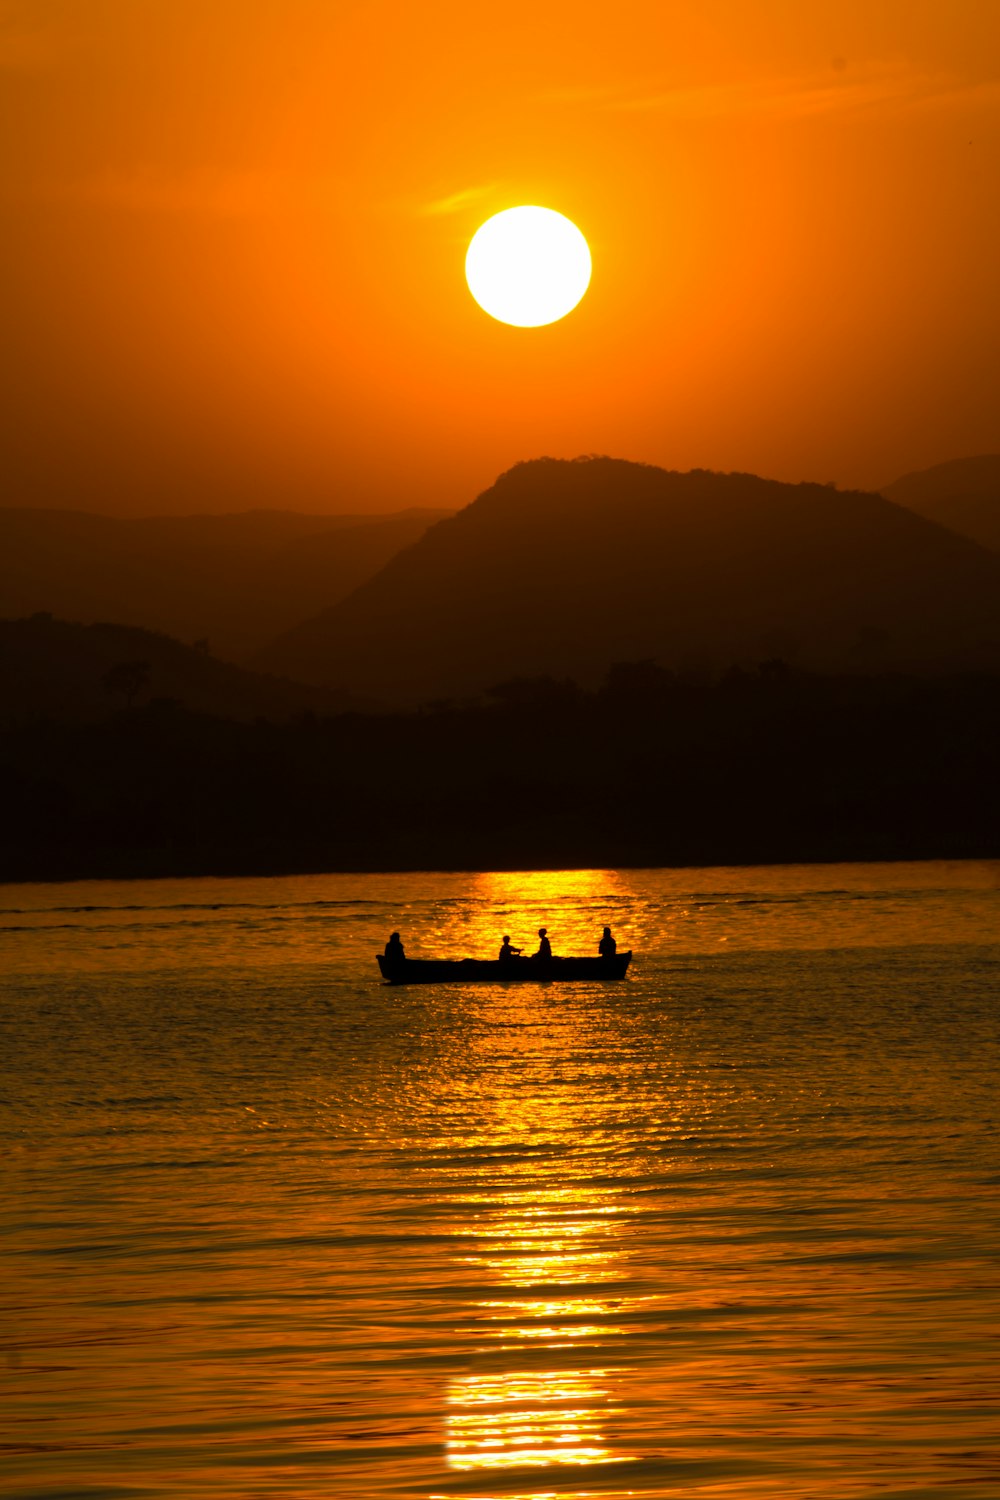 the sun is setting over the water with a boat in the foreground